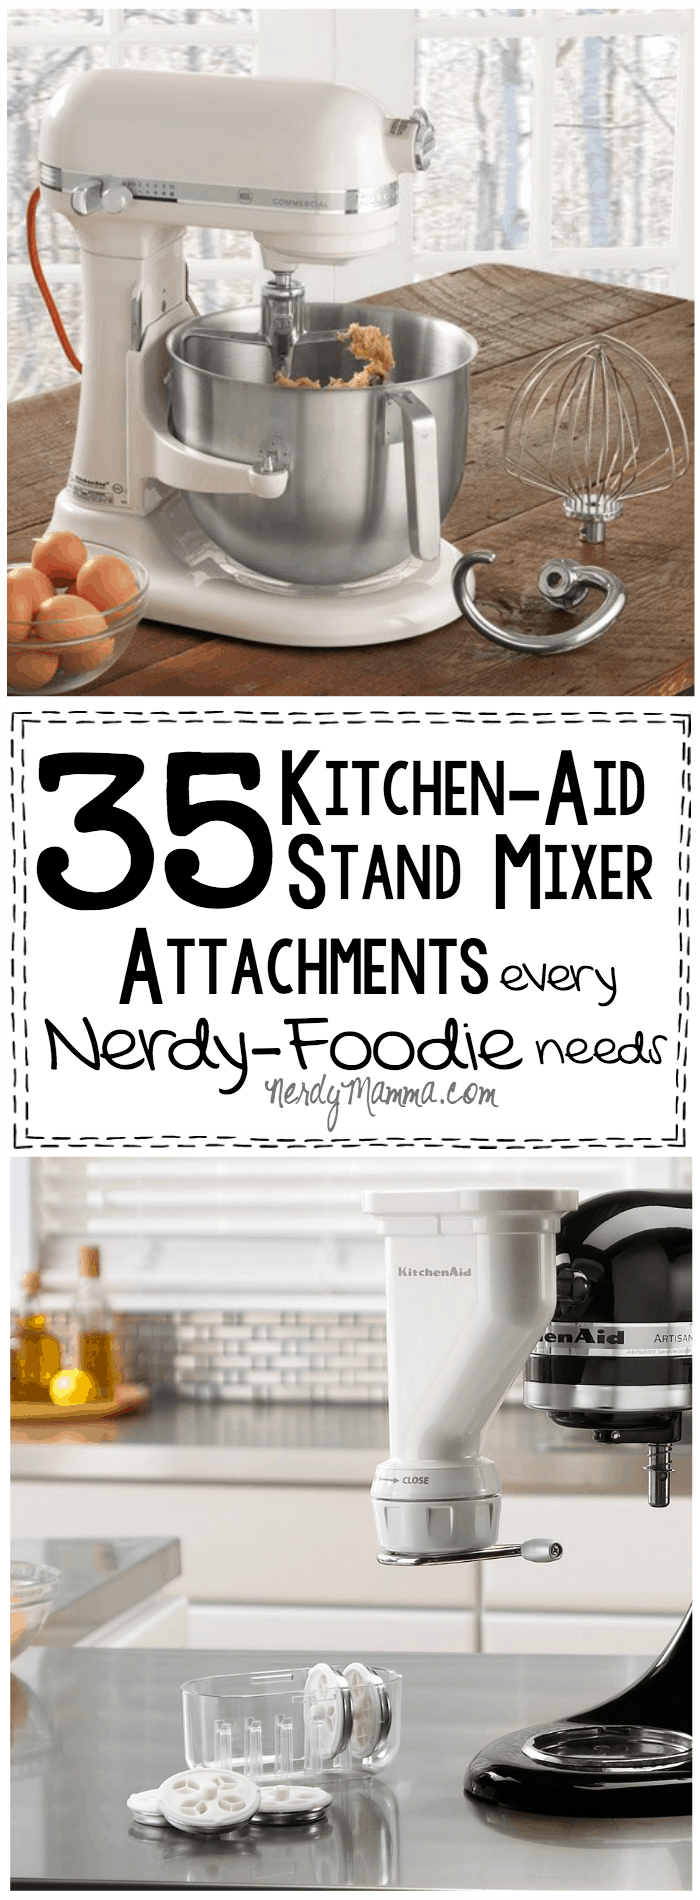 I love these 35 Kitchen-Aid Stand Mixer Attachments--what a great gift idea for a foodie! So easy, too...you can't go wrong.